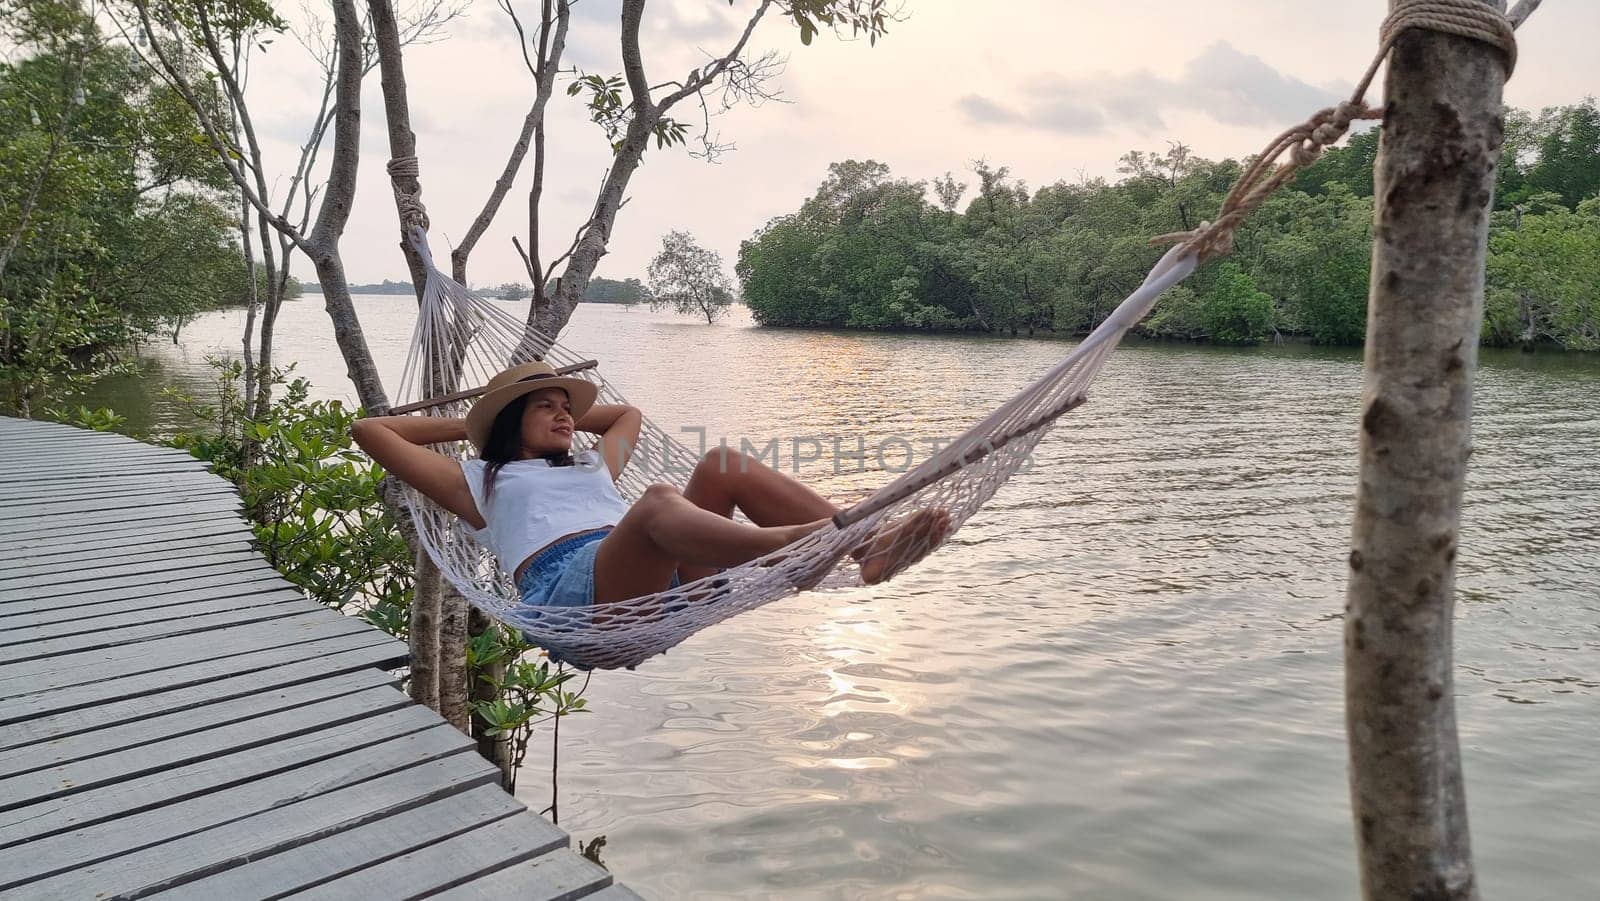 A woman peacefully relaxes in a hammock, gently swaying back and forth on a wooden dock surrounded by water by fokkebok